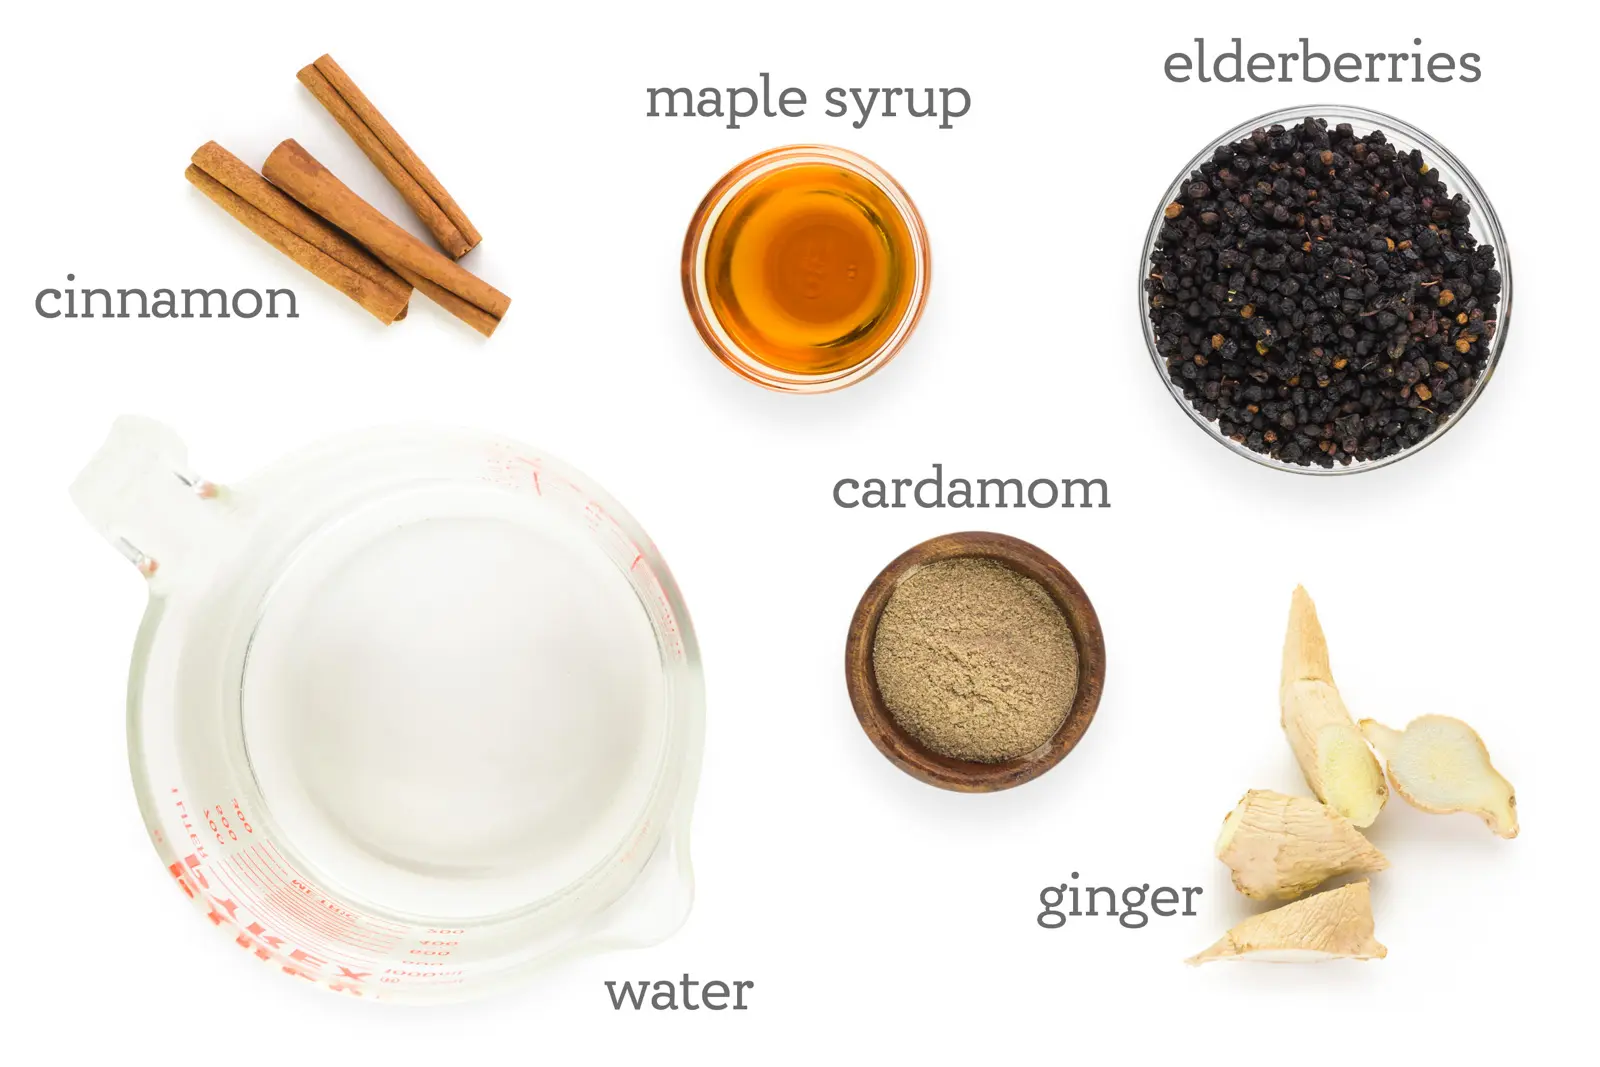 Ingredients are on a table. The labels read, "Cinnamon, maple syrup, elderberries, cardamom, ginger, and water."